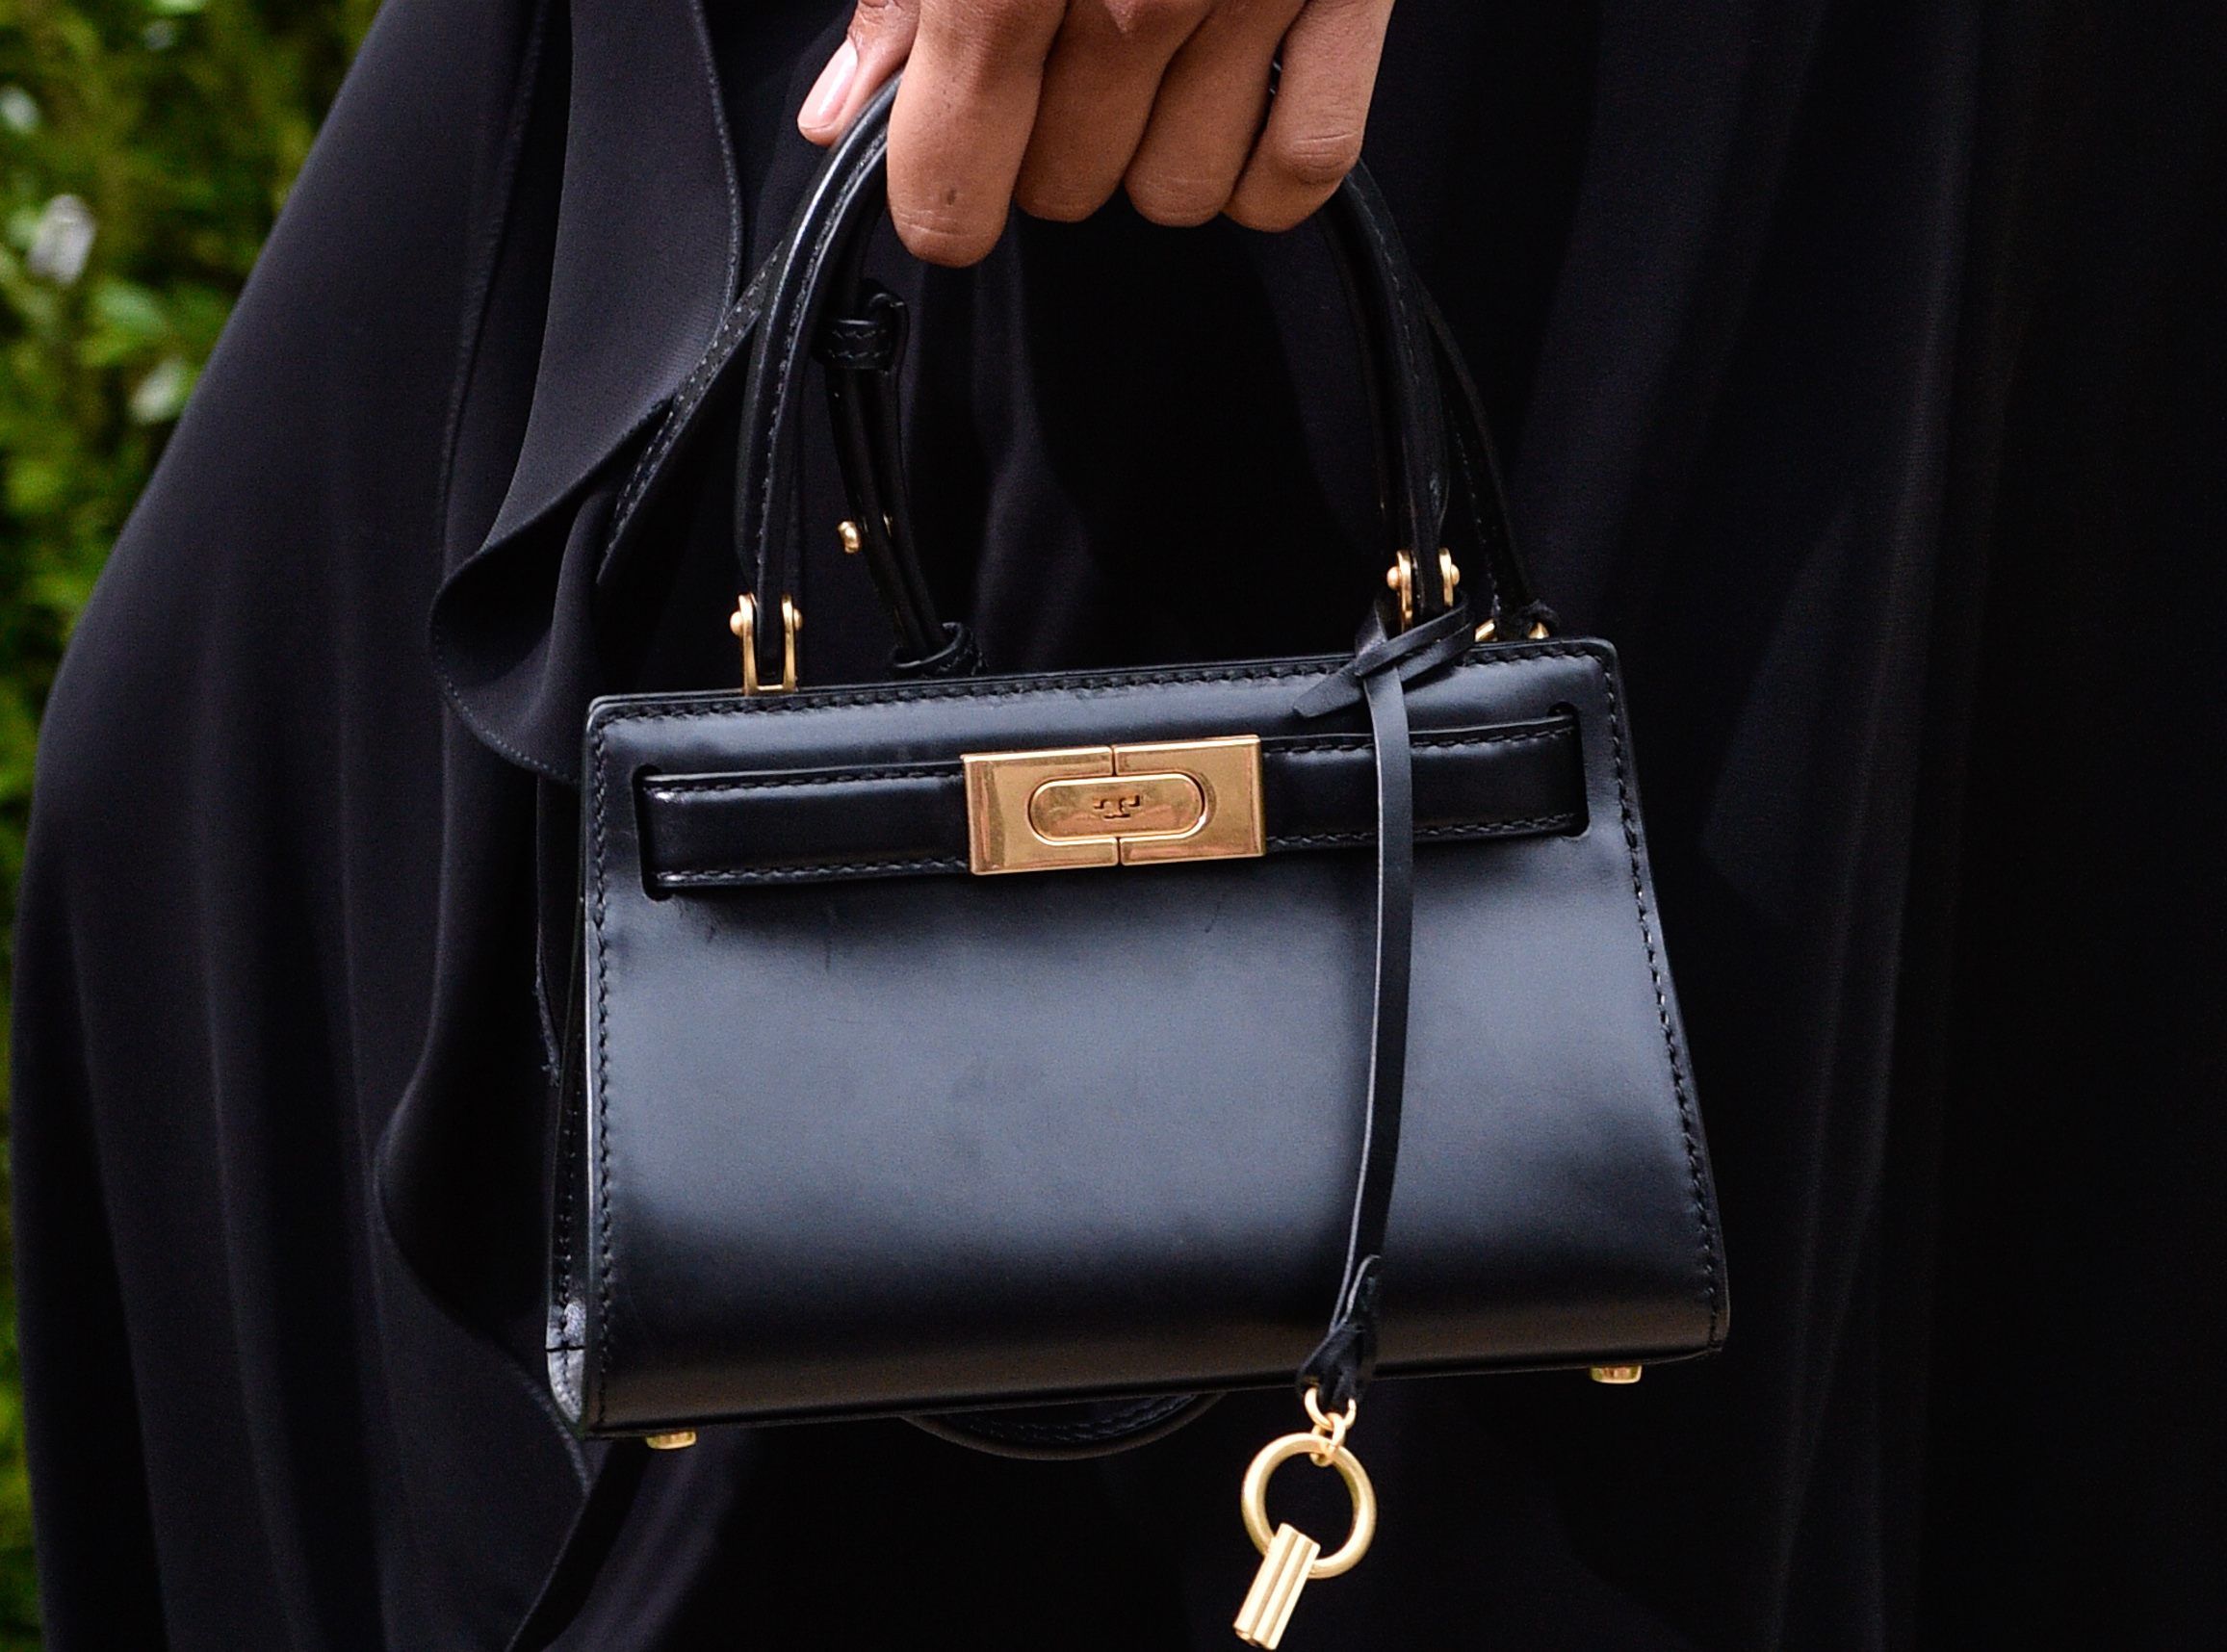 Tory Burch Bags Are on Sale at Nordstrom: Shop Our Favorite